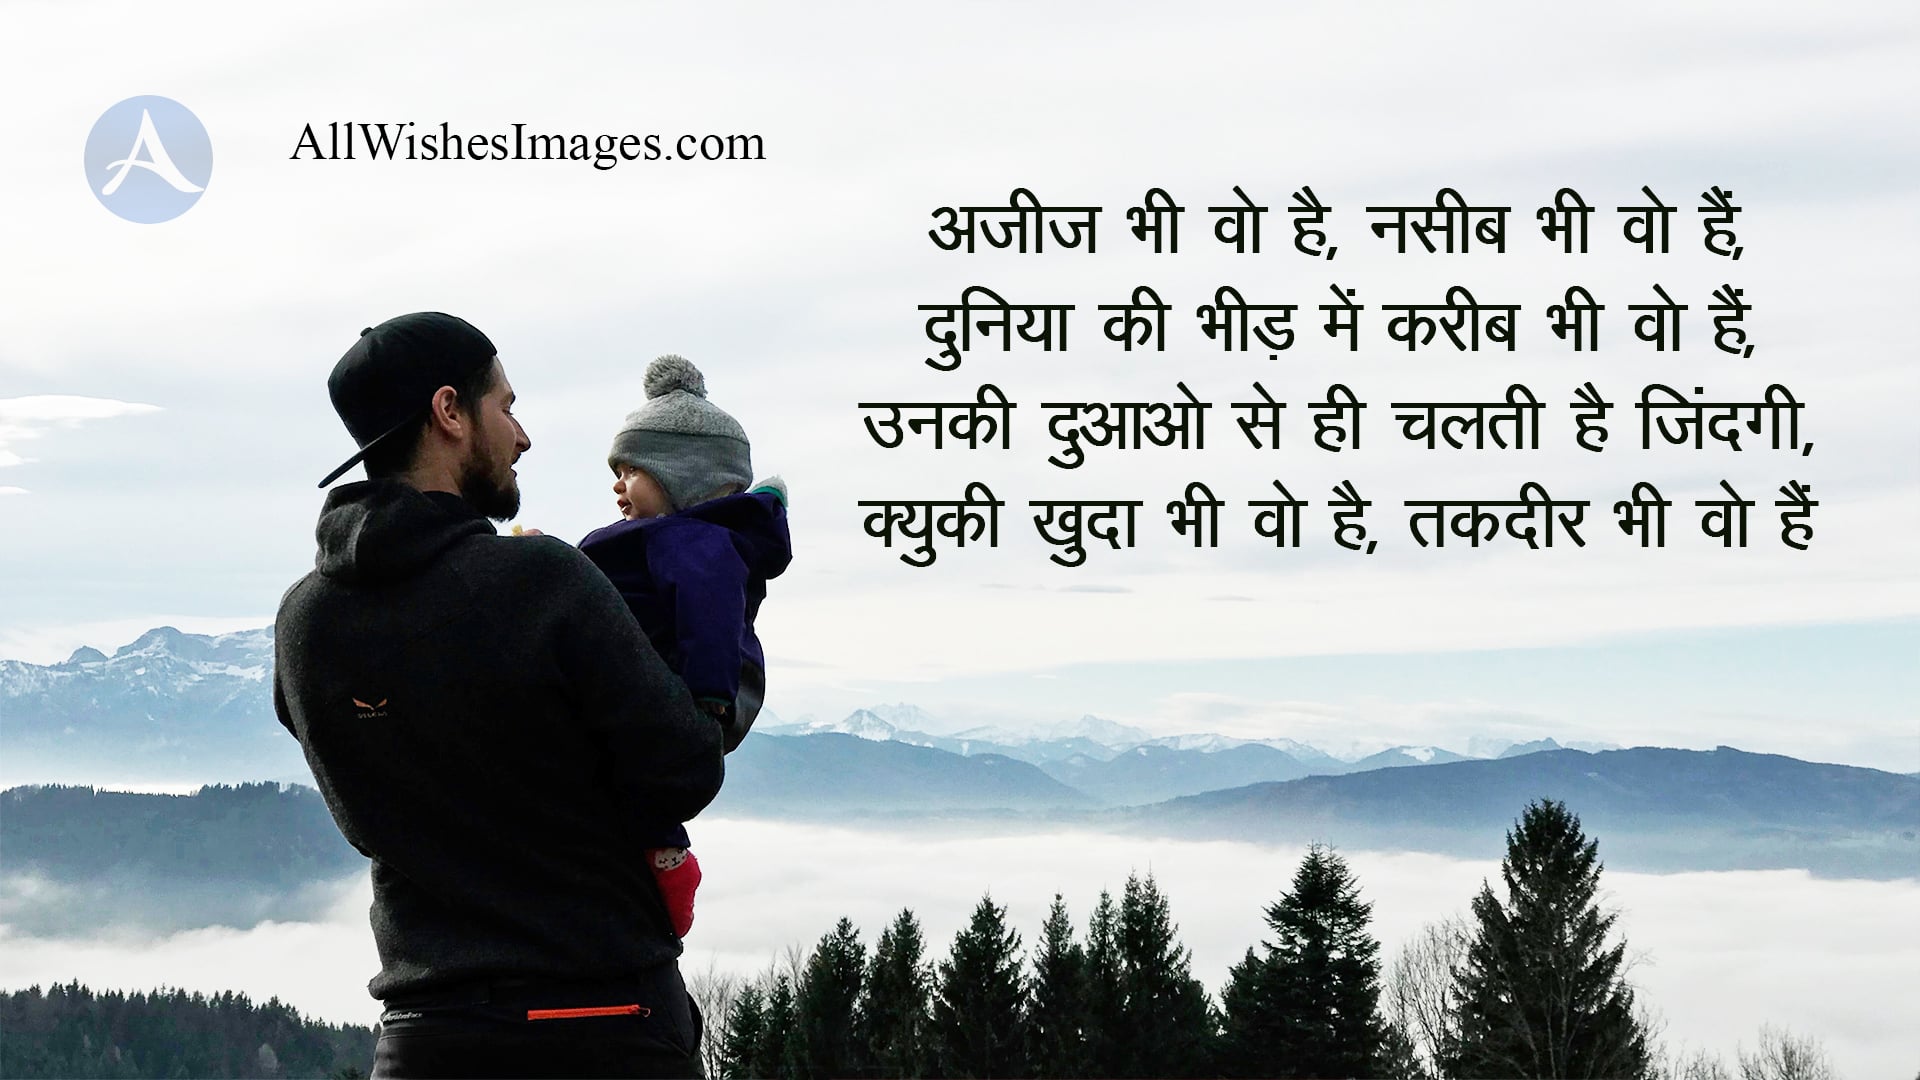 Father And Daughter Image With Quotes Hindi All Wishes Images Images For Whatsapp